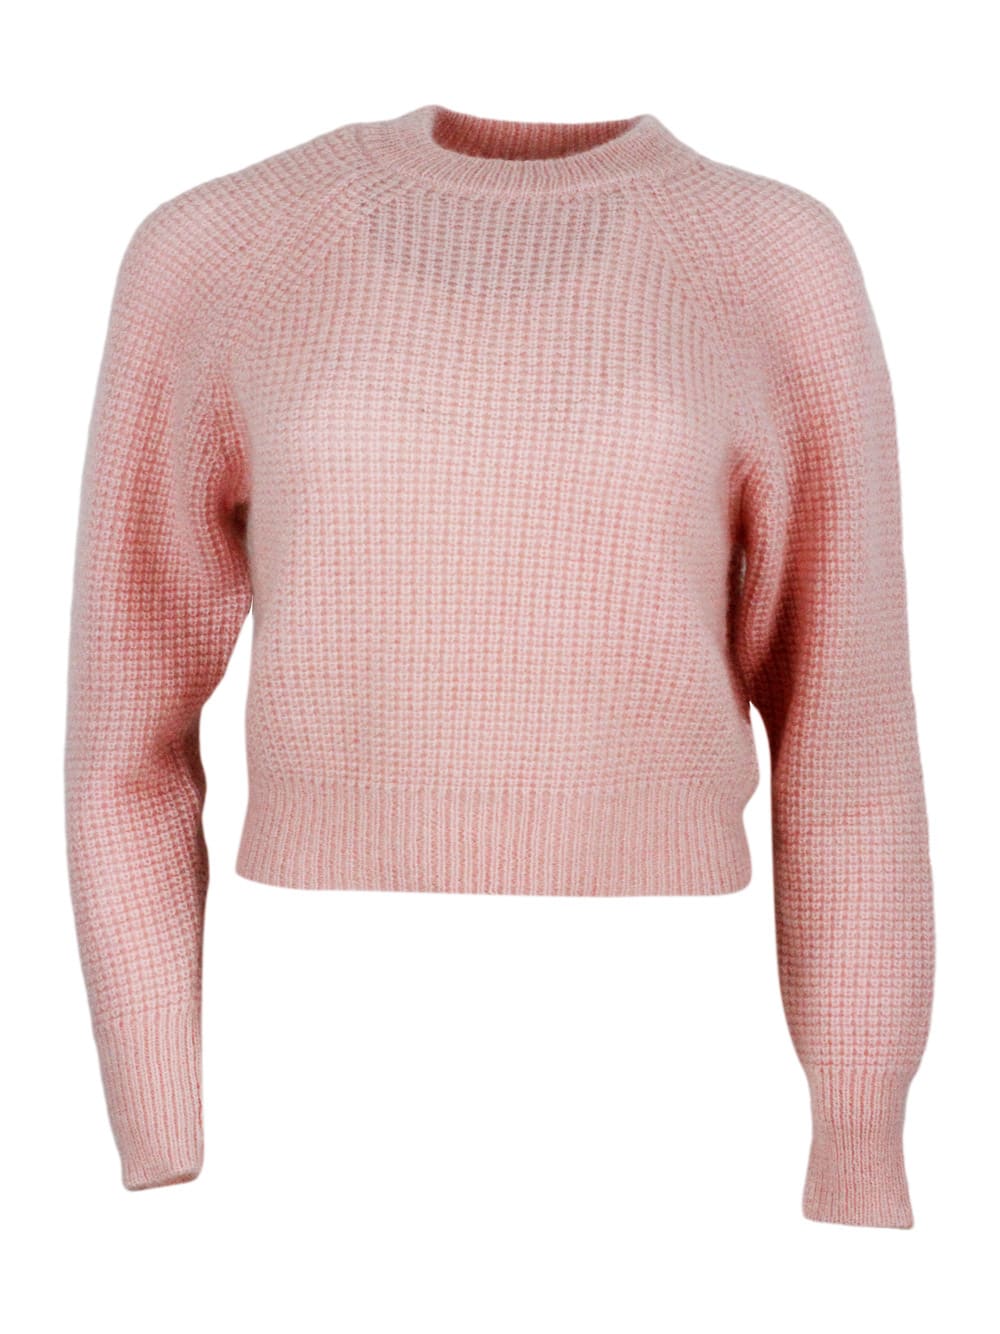 Shop Fabiana Filippi Long-sleeved Crew-neck Sweater In Mohair, Cropped Model With Raglan Sleeves And Diamond Stitch Work In Pink